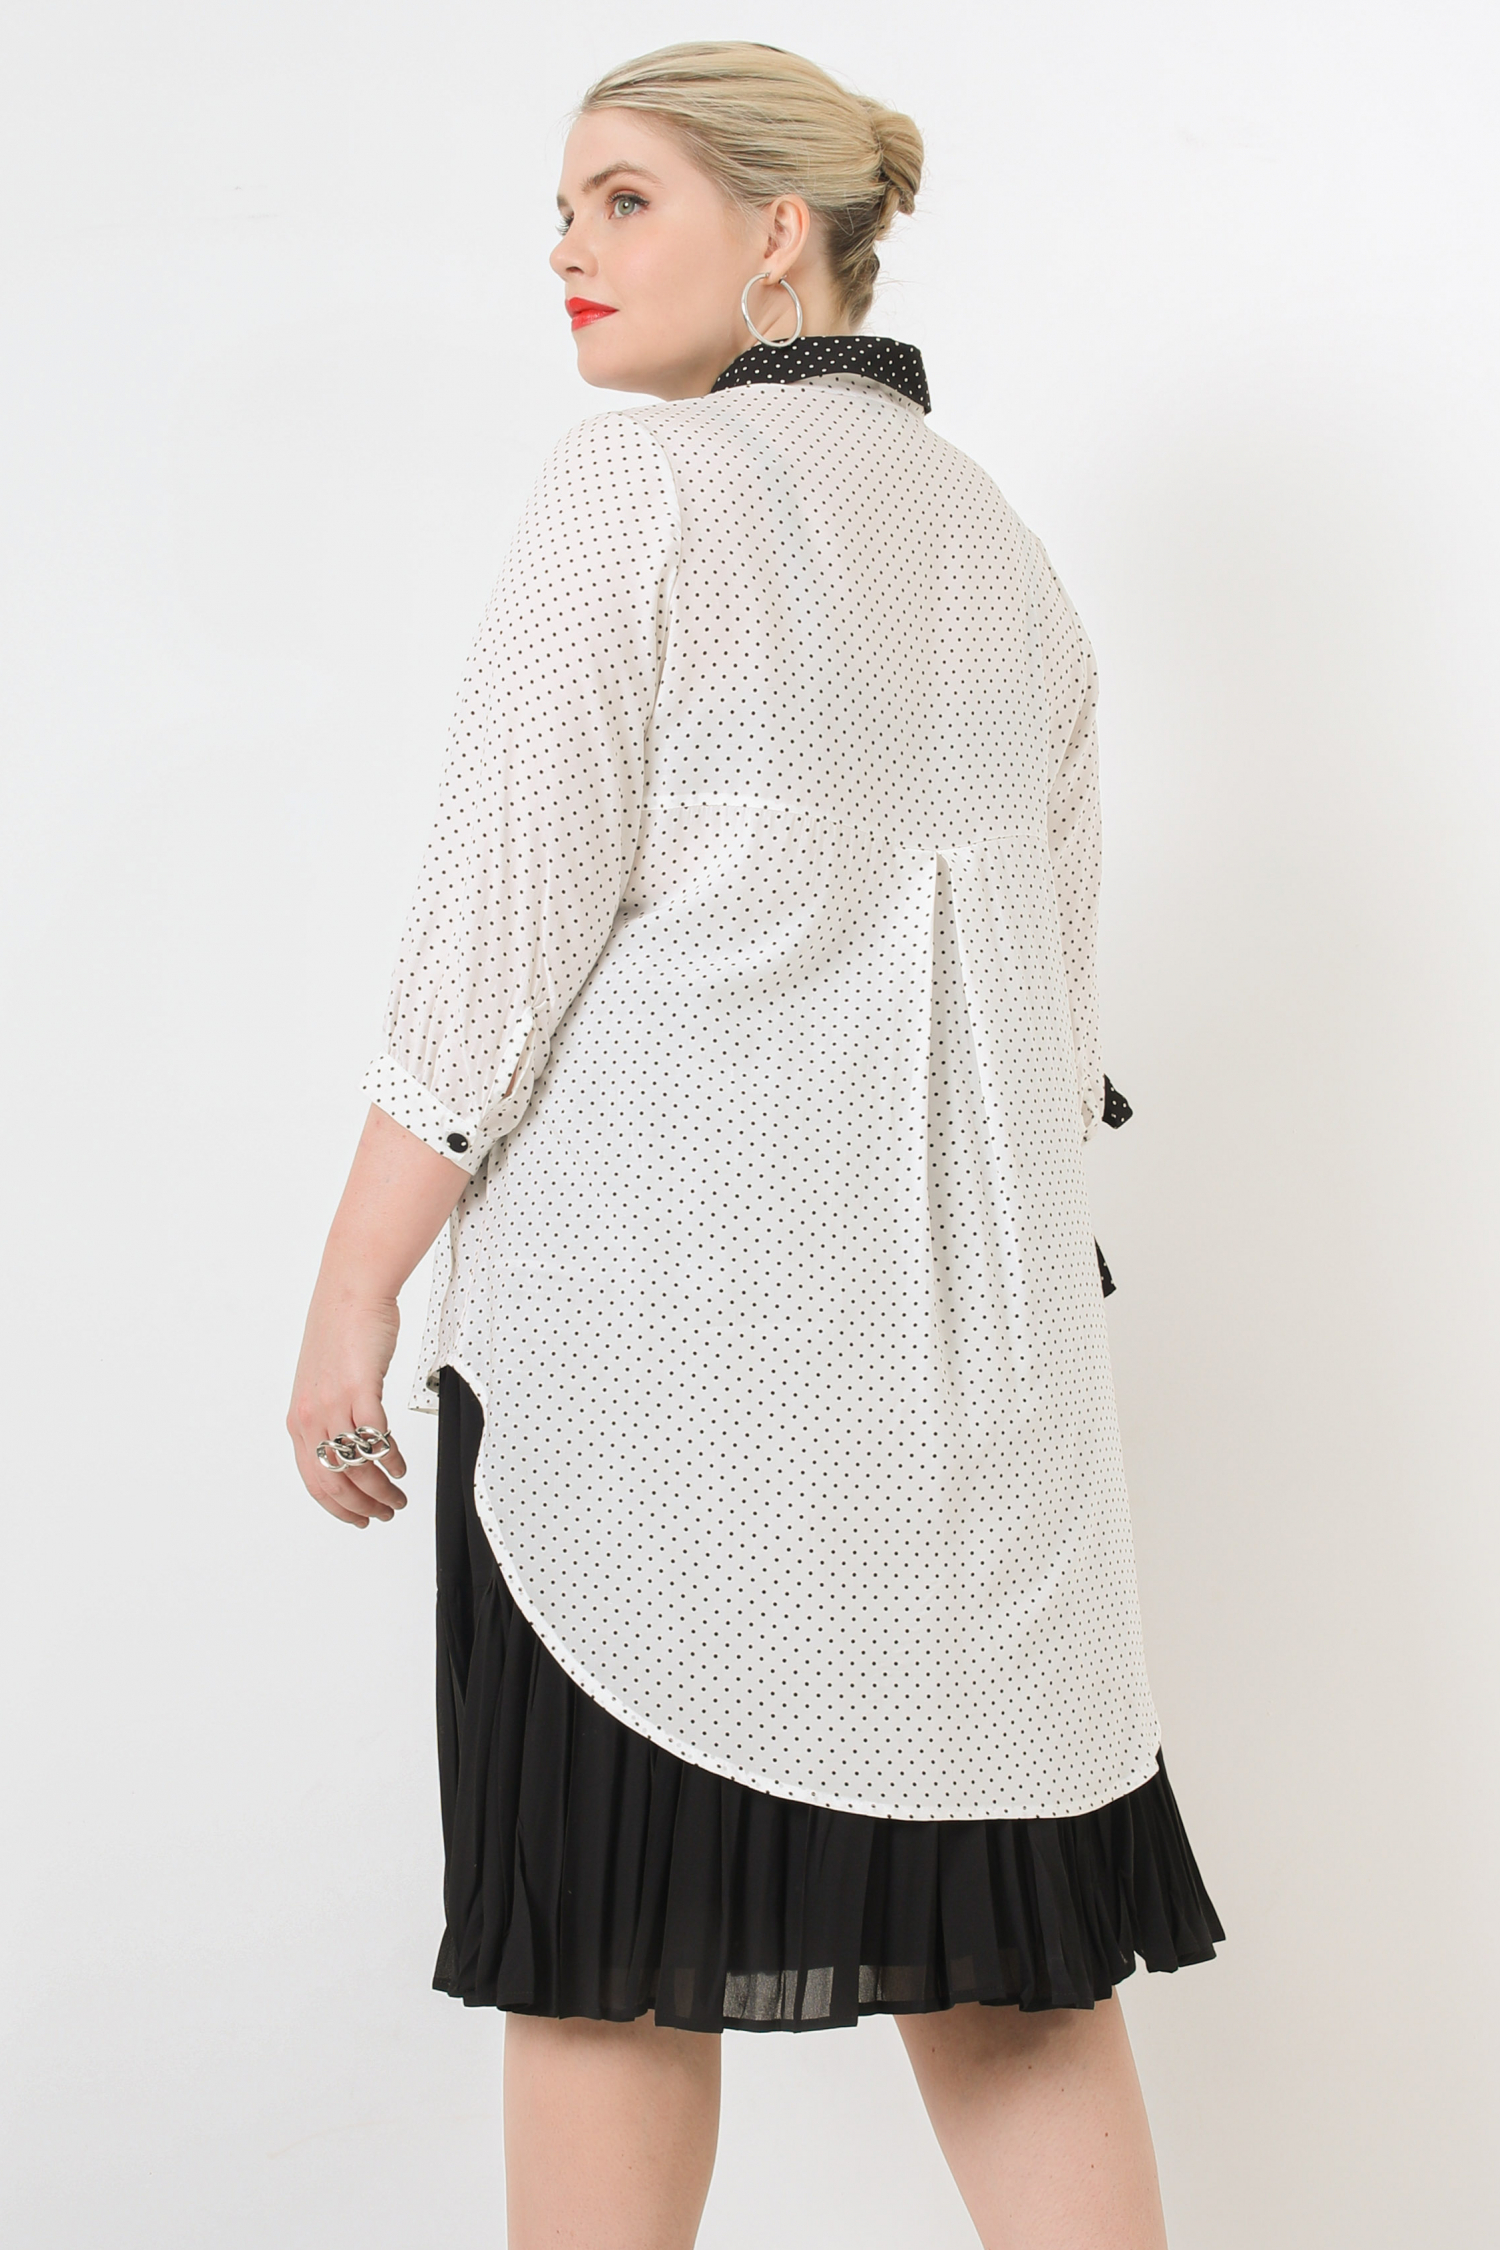 Polka dot shirt with eyelets on sleeve (shipping March 25/31)